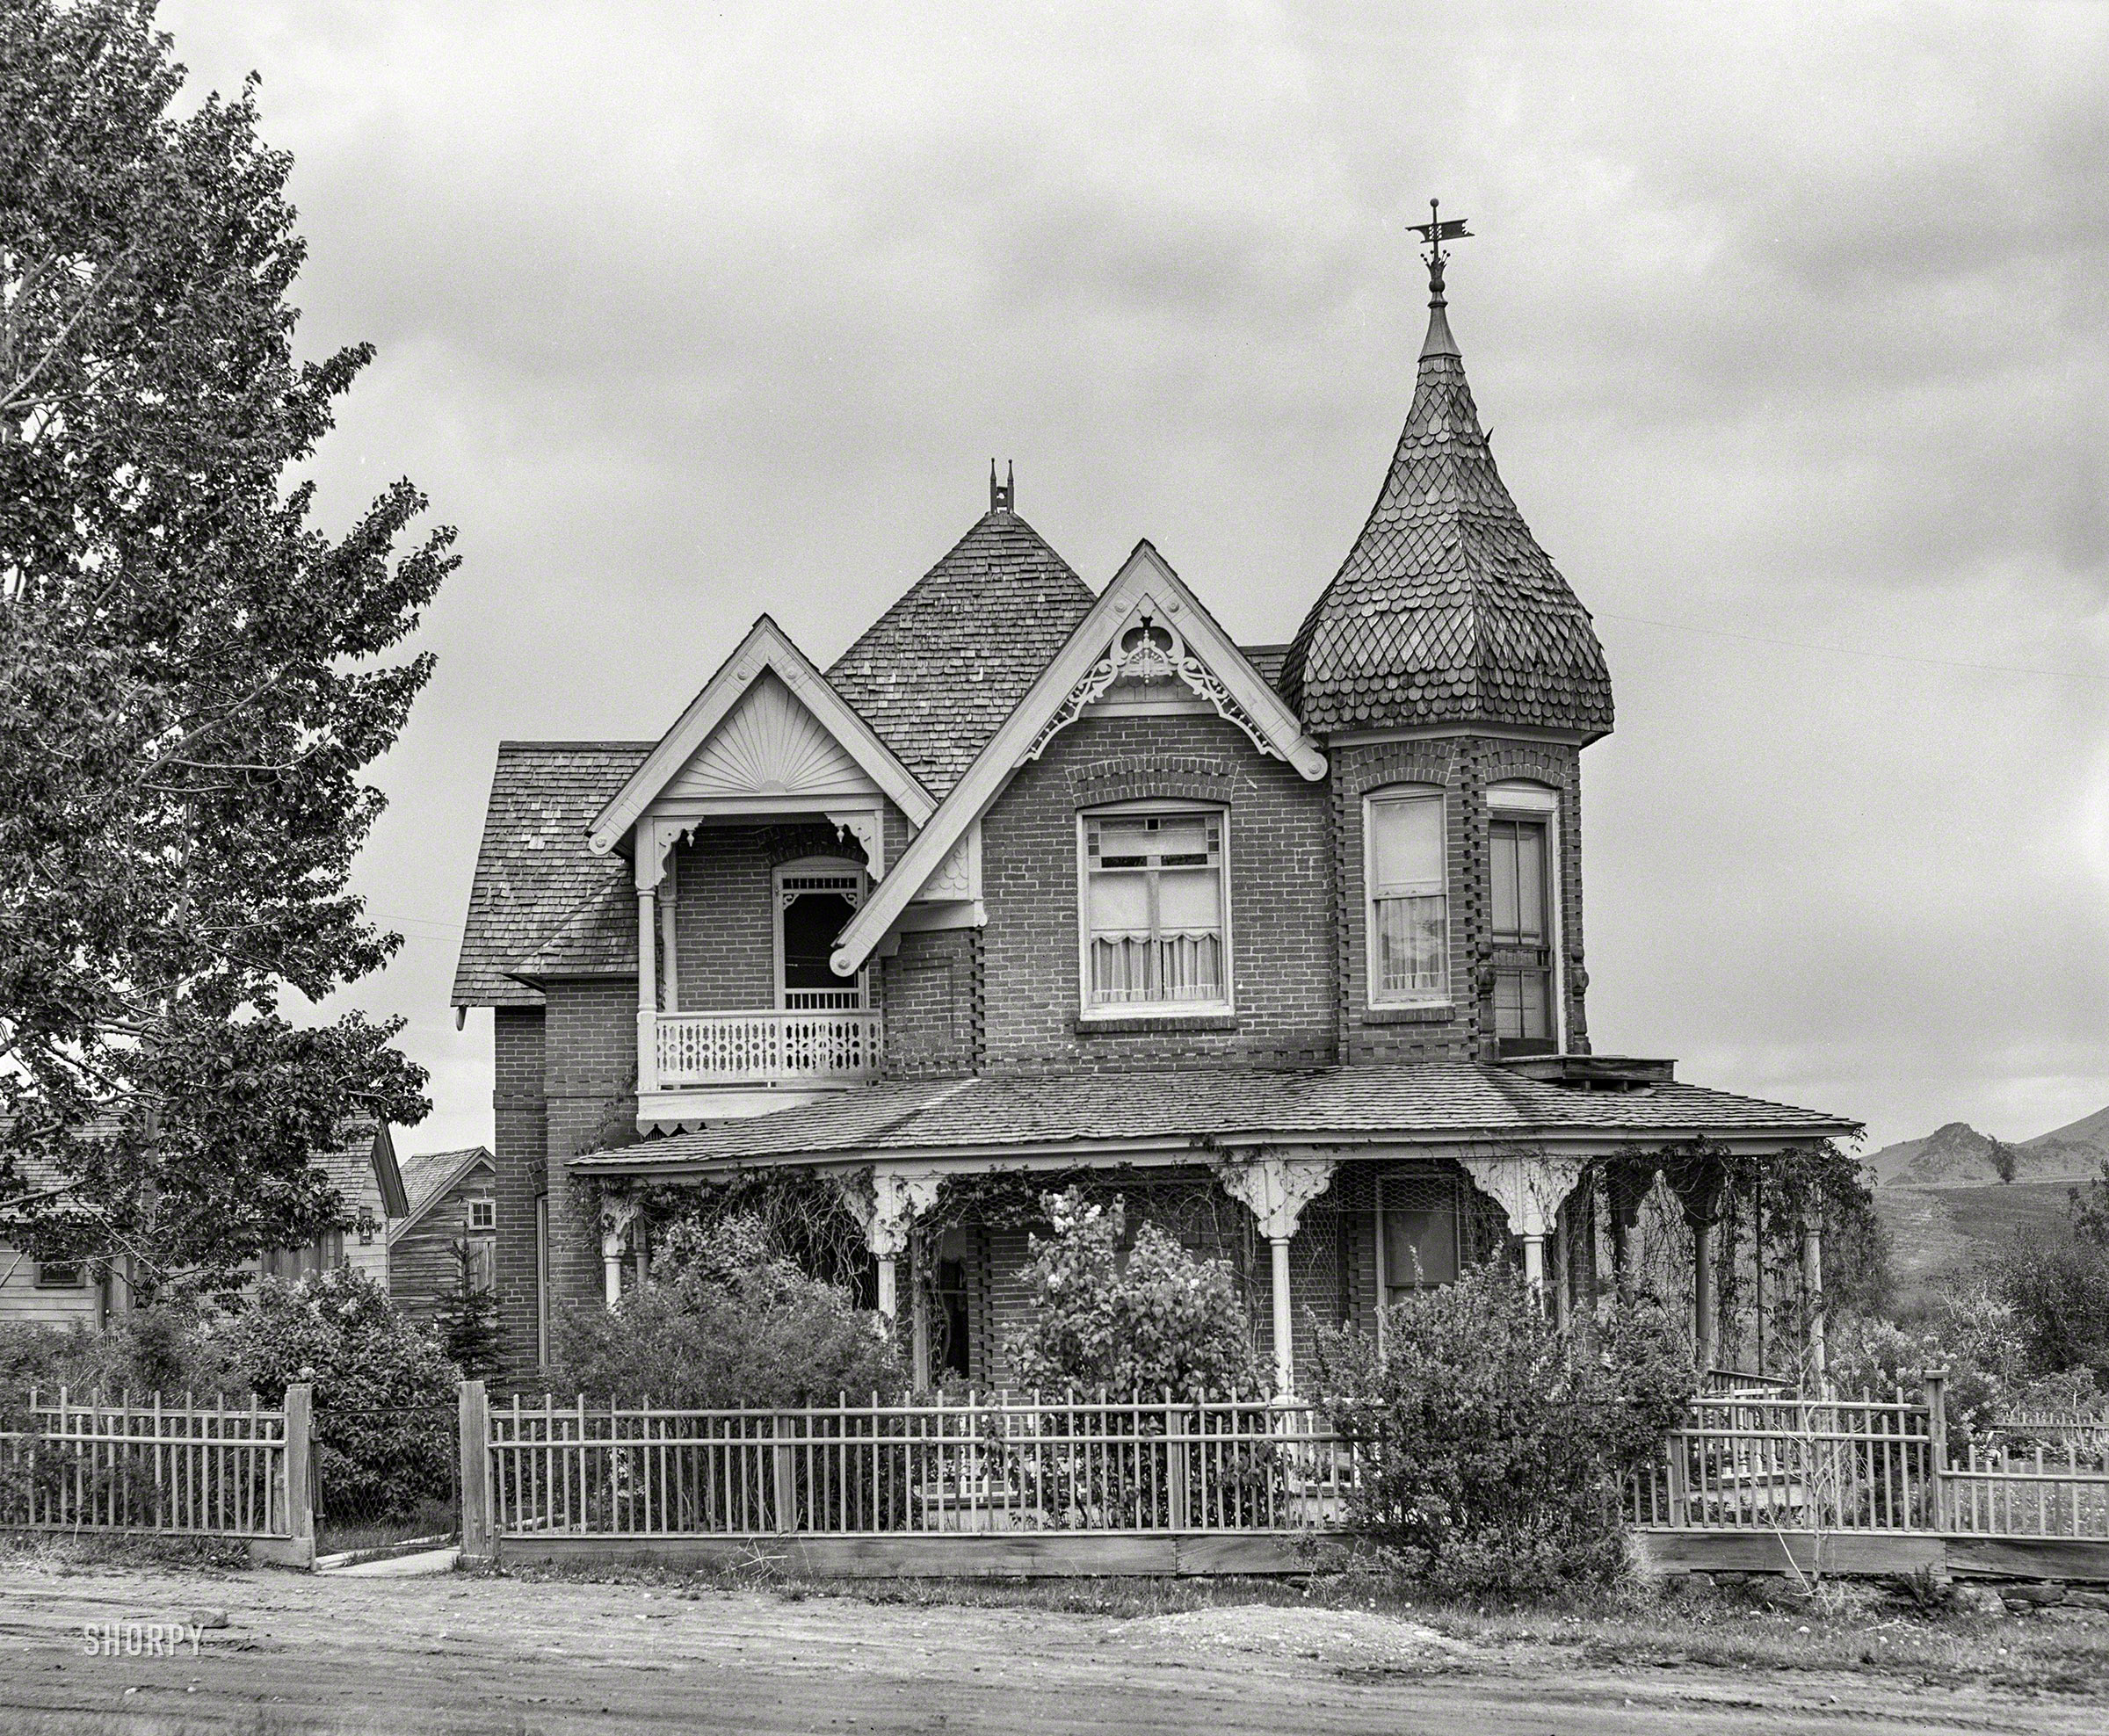 June 1939. "Gold mine owners built substantial homes in ghost town of Pony, Montana." Medium format negative by Arthur Rothstein. View full size.